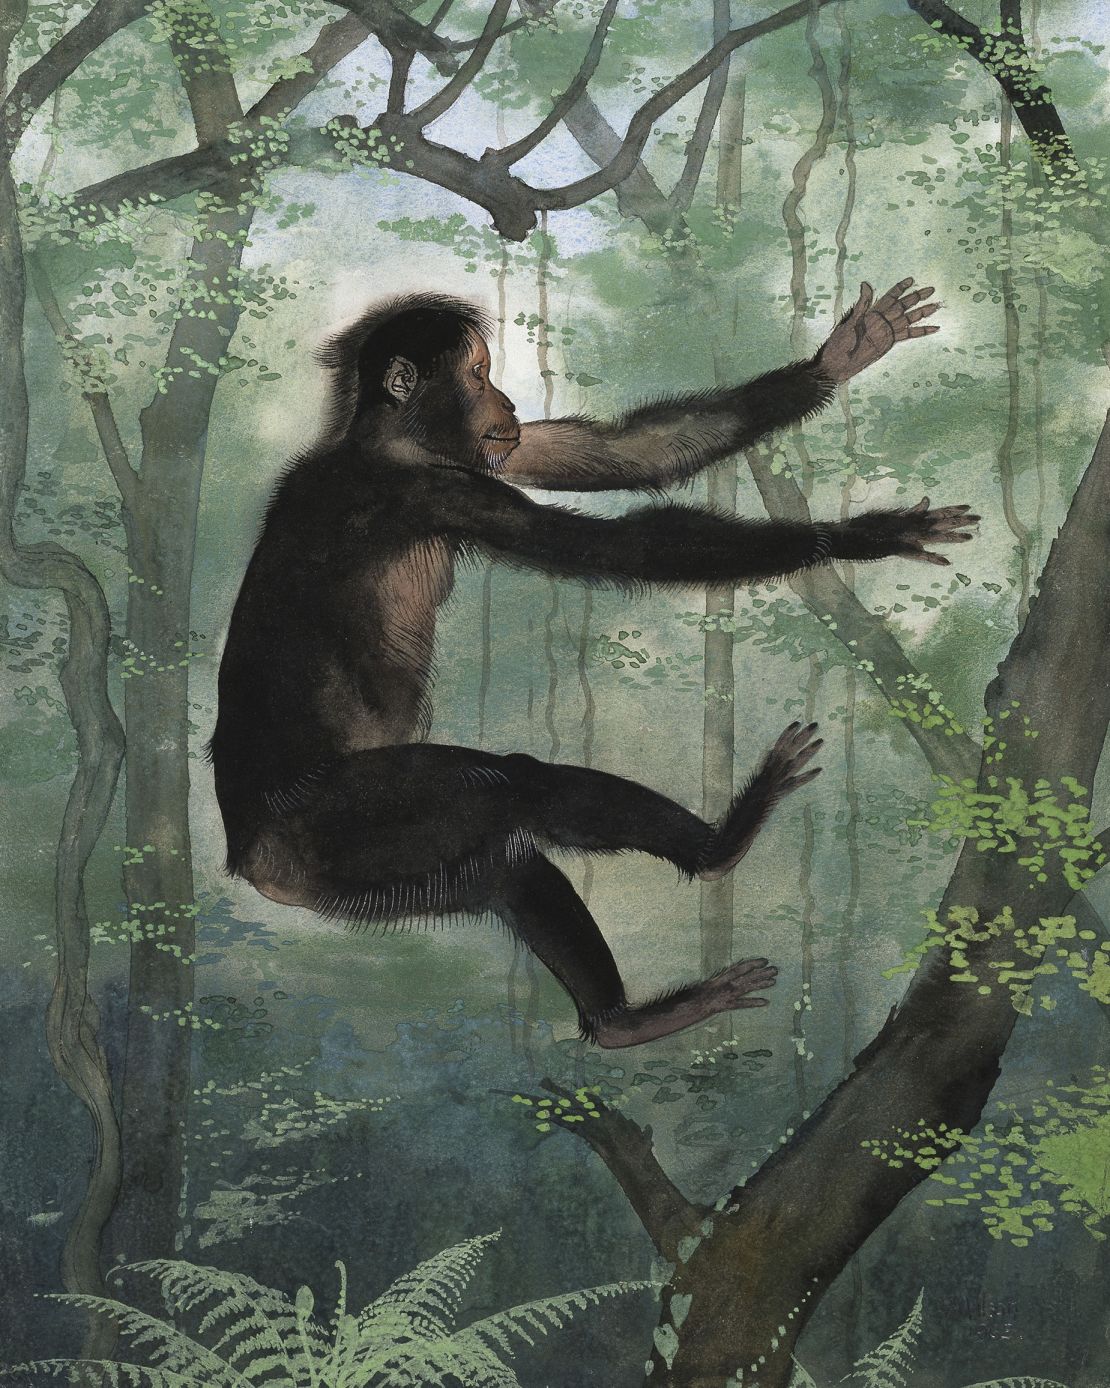 Fossils show that the ancient primate Proconsul africanus, shown in the illustration above, lived in trees without a tail.